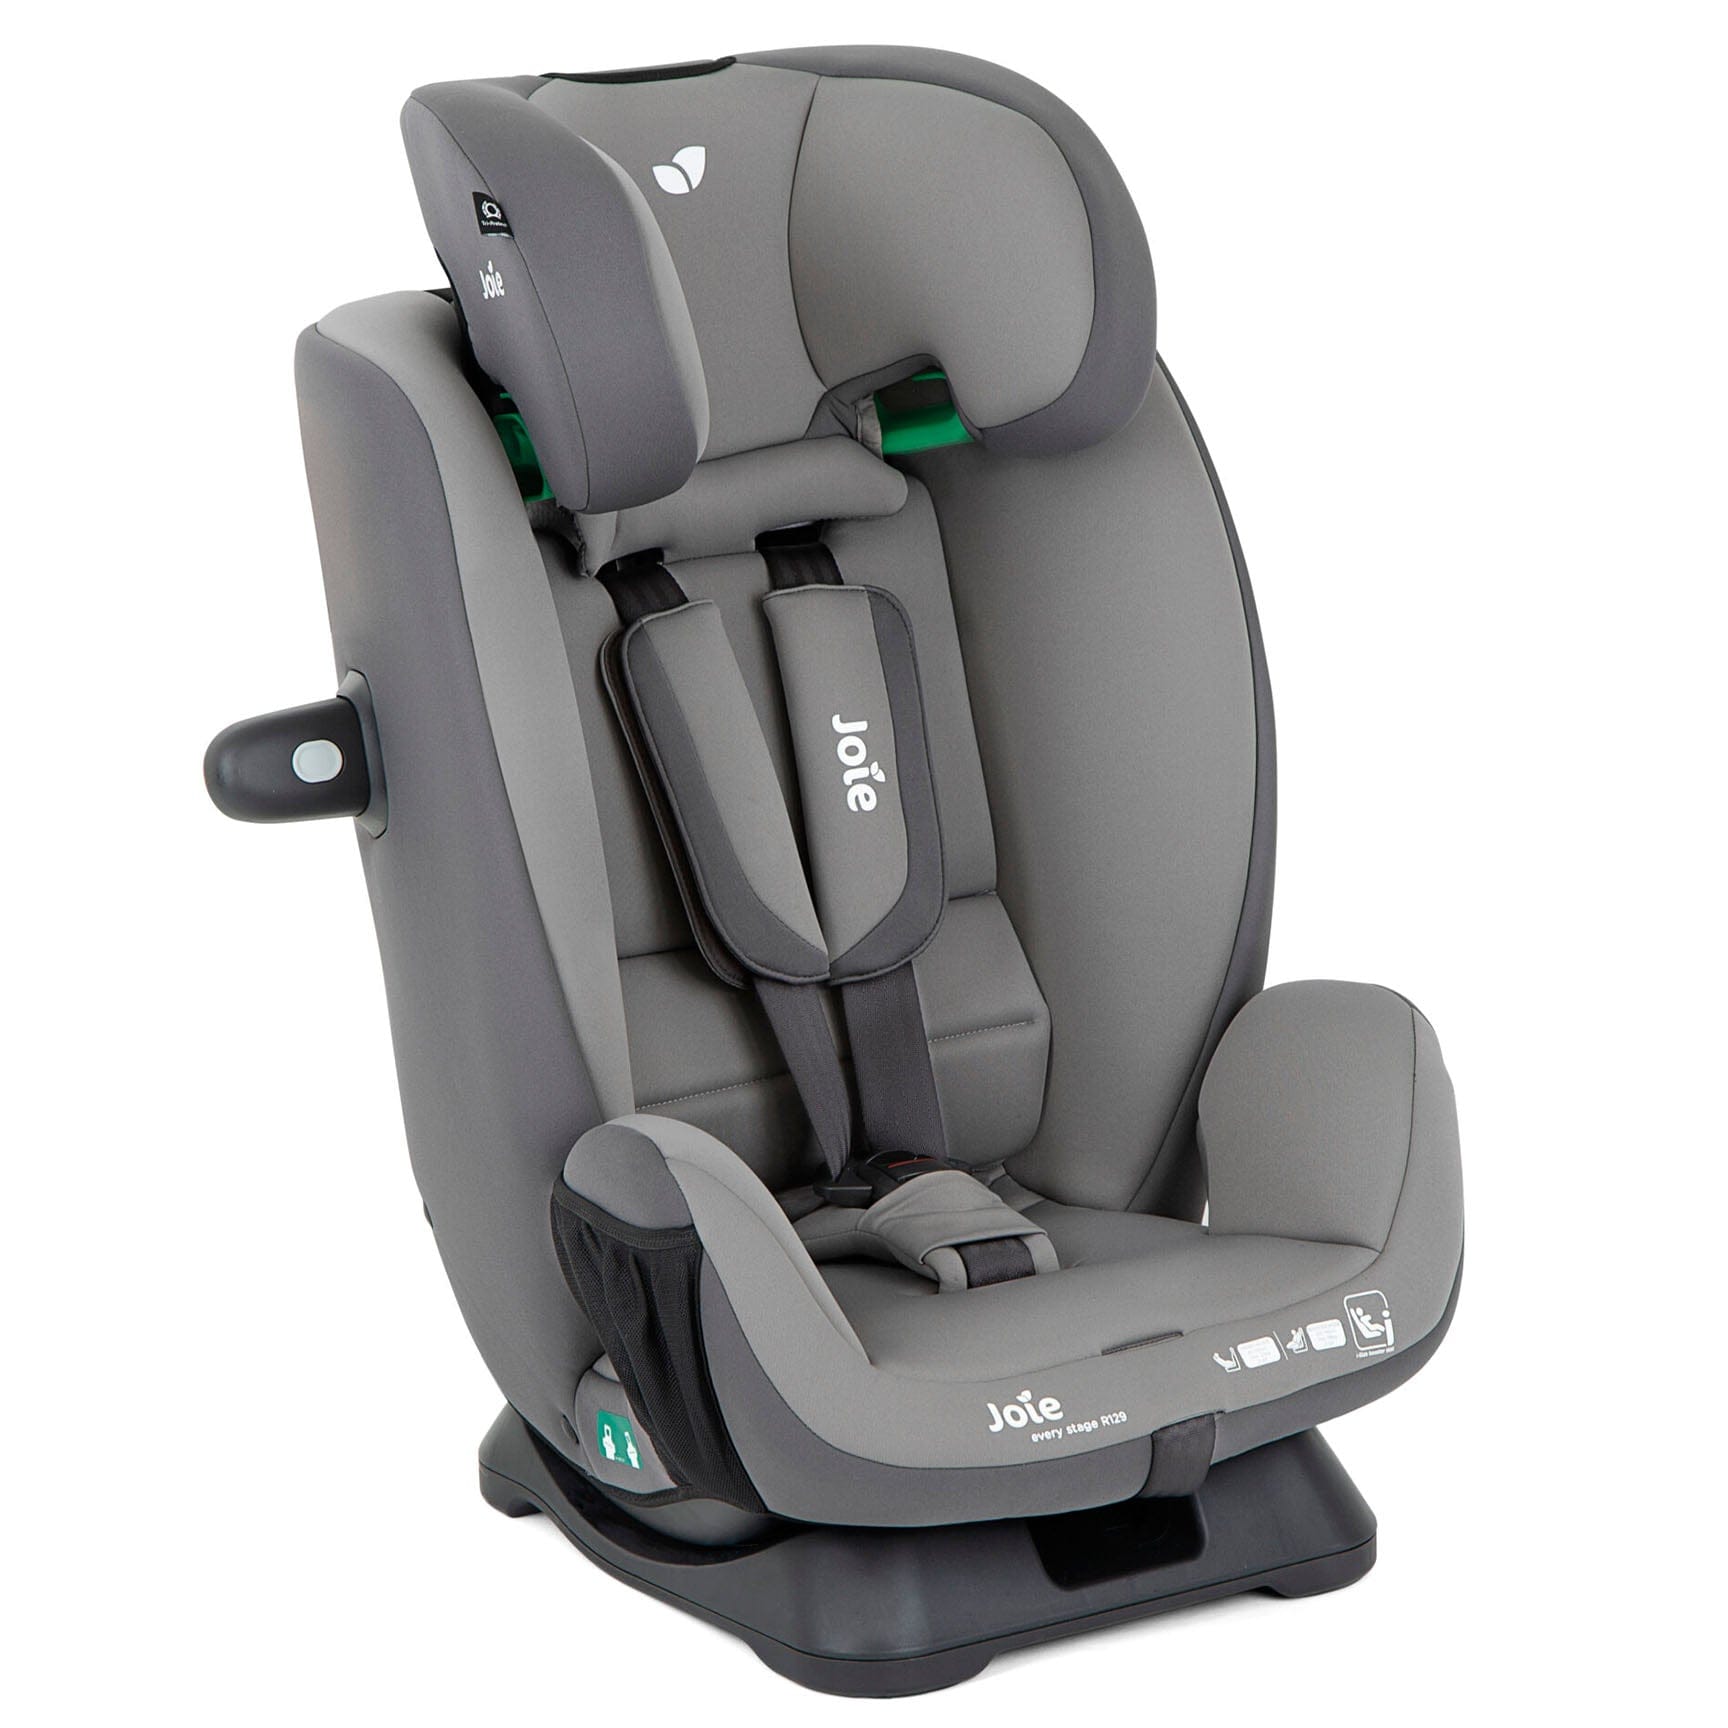 Joie Every Stage R129 in Cobblestone Combination Car Seats C2117AACBL000 5056080612720